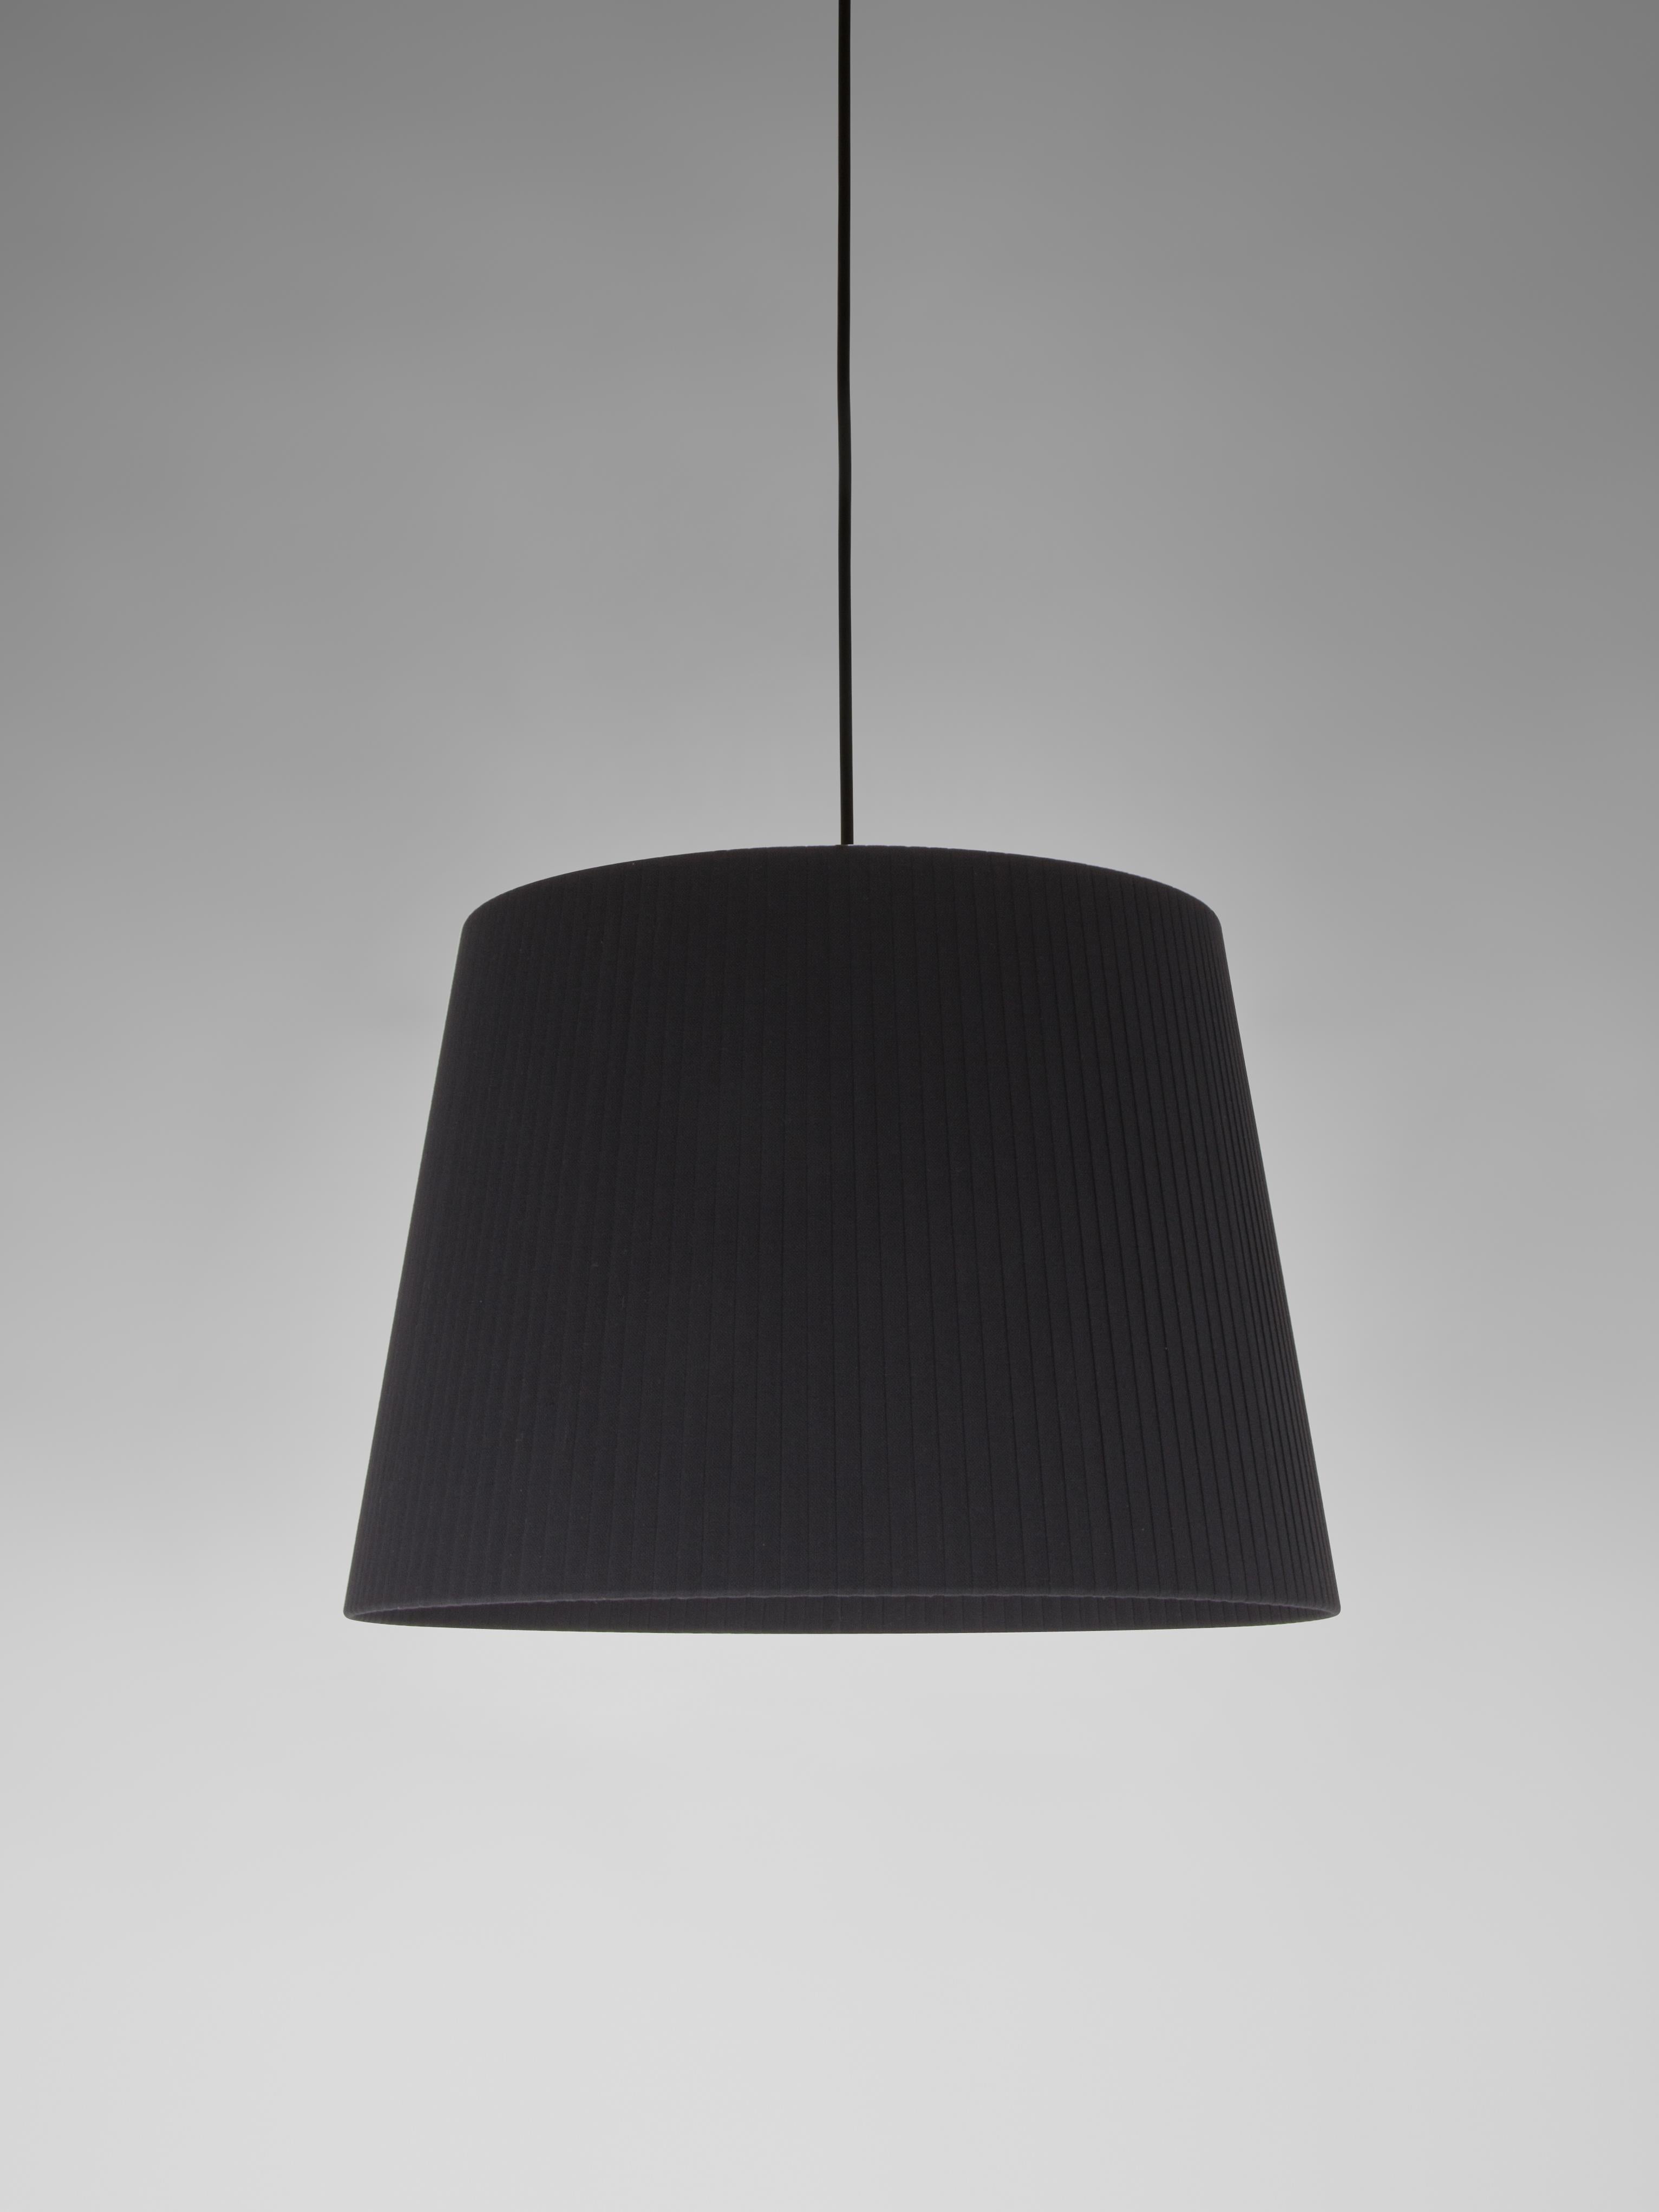 Black Sísísí Cónicas GT1 Pendant Lamp by Santa & Cole.
Dimensions: D 45 x H 32 cm.
Materials: Metal, ribbon.
Available in other colors.
Also available in two lights version.

The conical shape group has multiple finishes and sizes. It consists